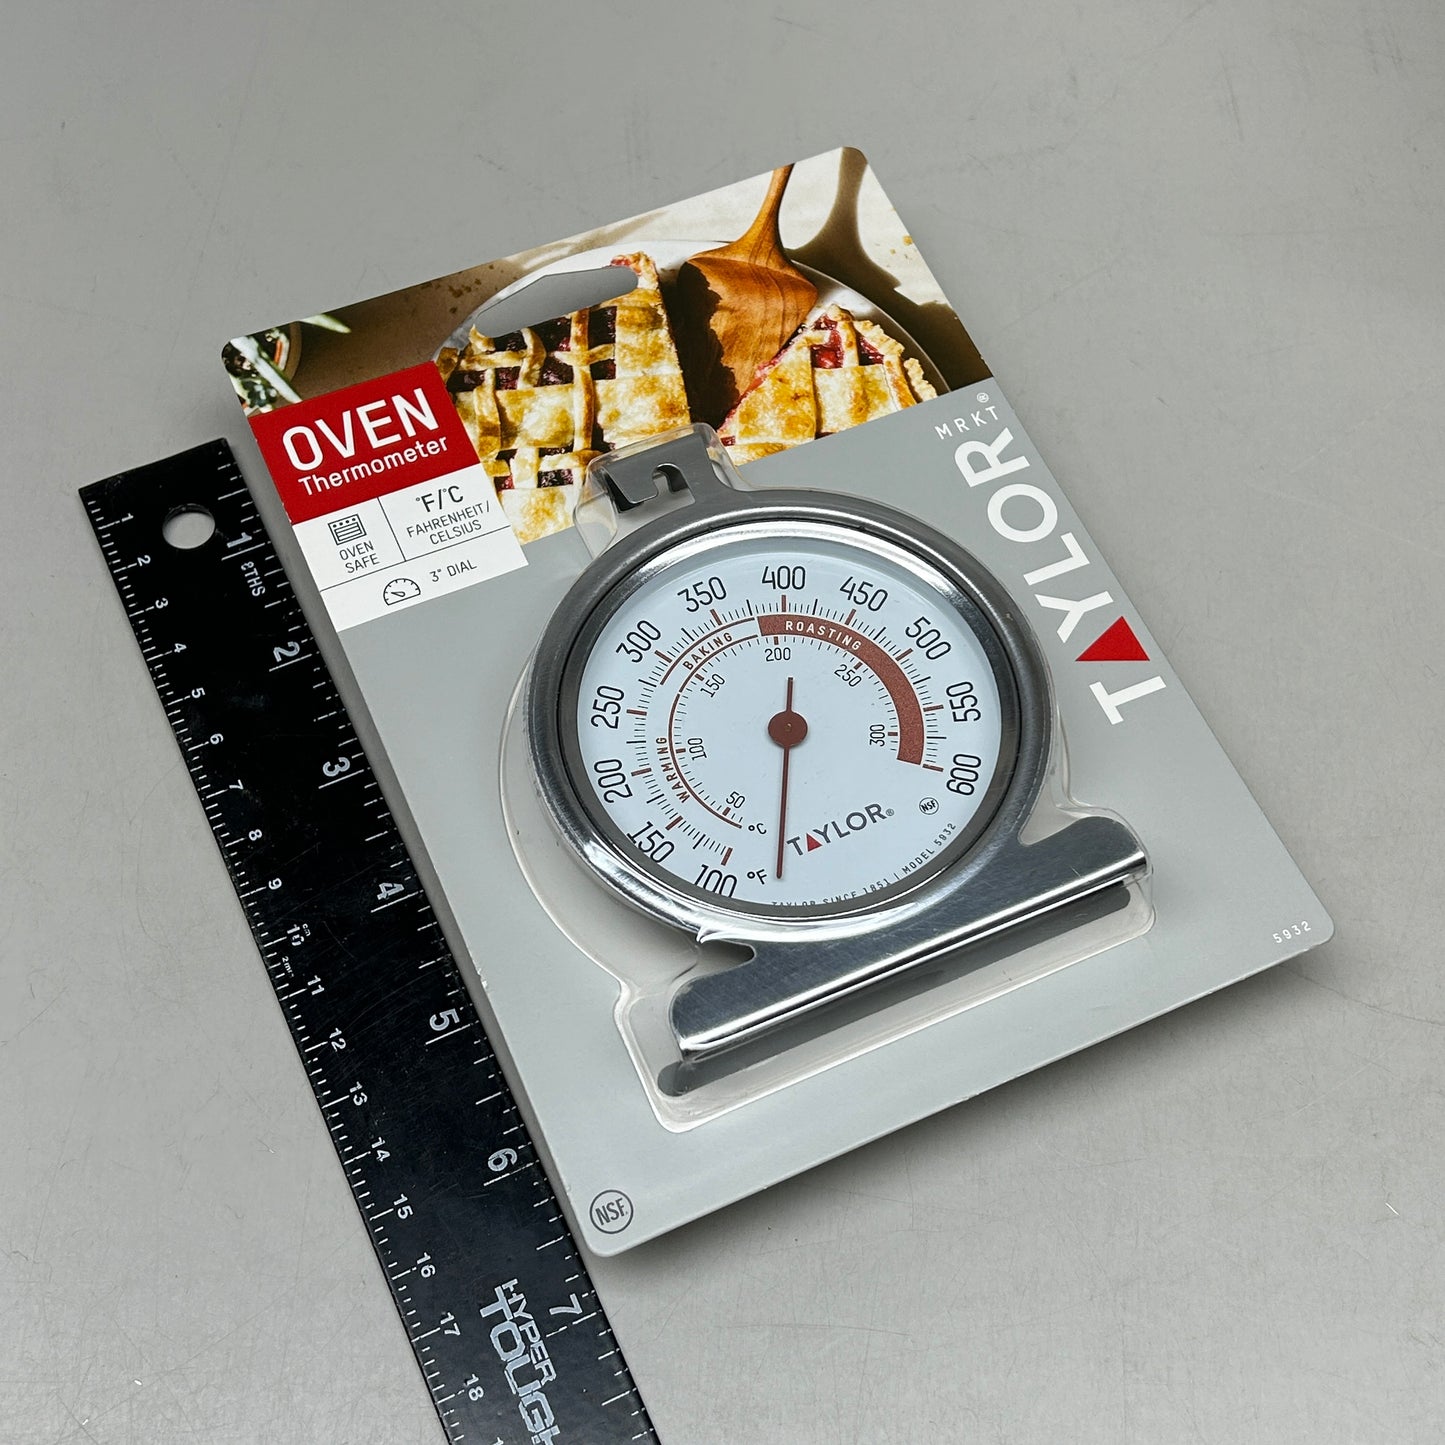 TAYLOR Analog Dial Oven Thermometer Stainless Steel 5932 (New)